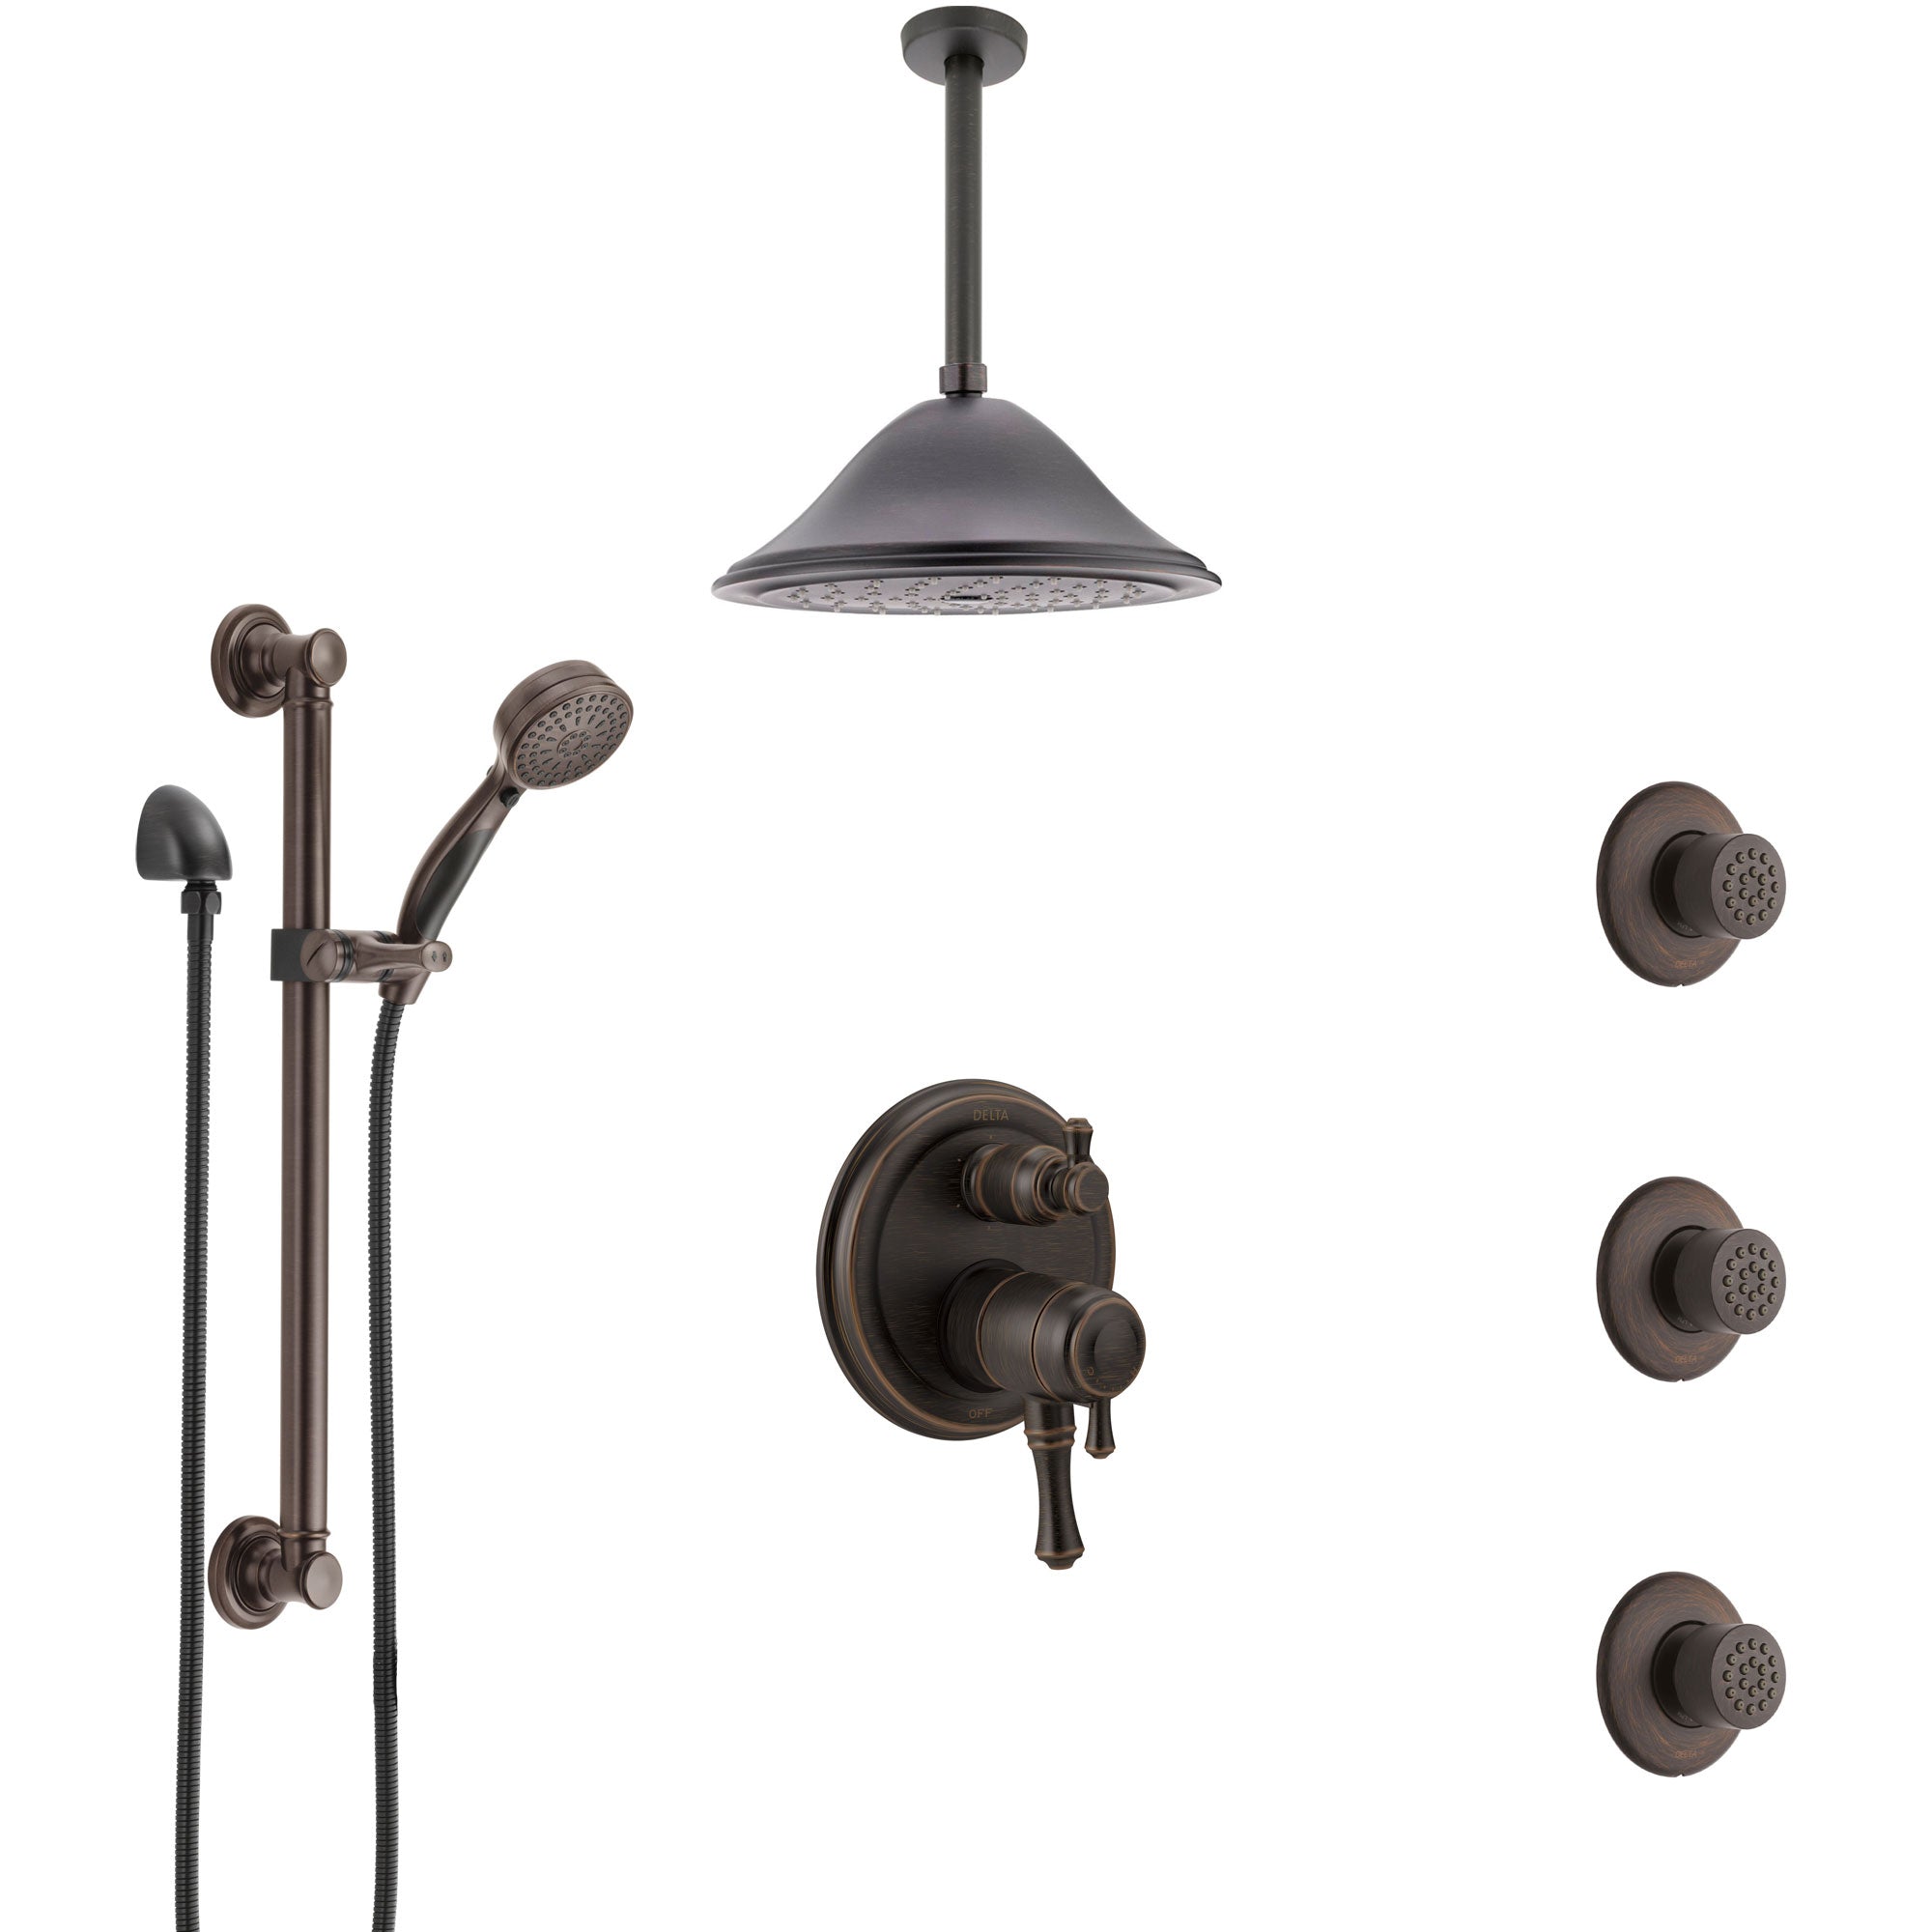 Delta Cassidy Venetian Bronze Dual Control Handle Shower System, Integrated Diverter, Ceiling Showerhead, 3 Body Jets, Grab Bar Hand Spray SS27997RB8